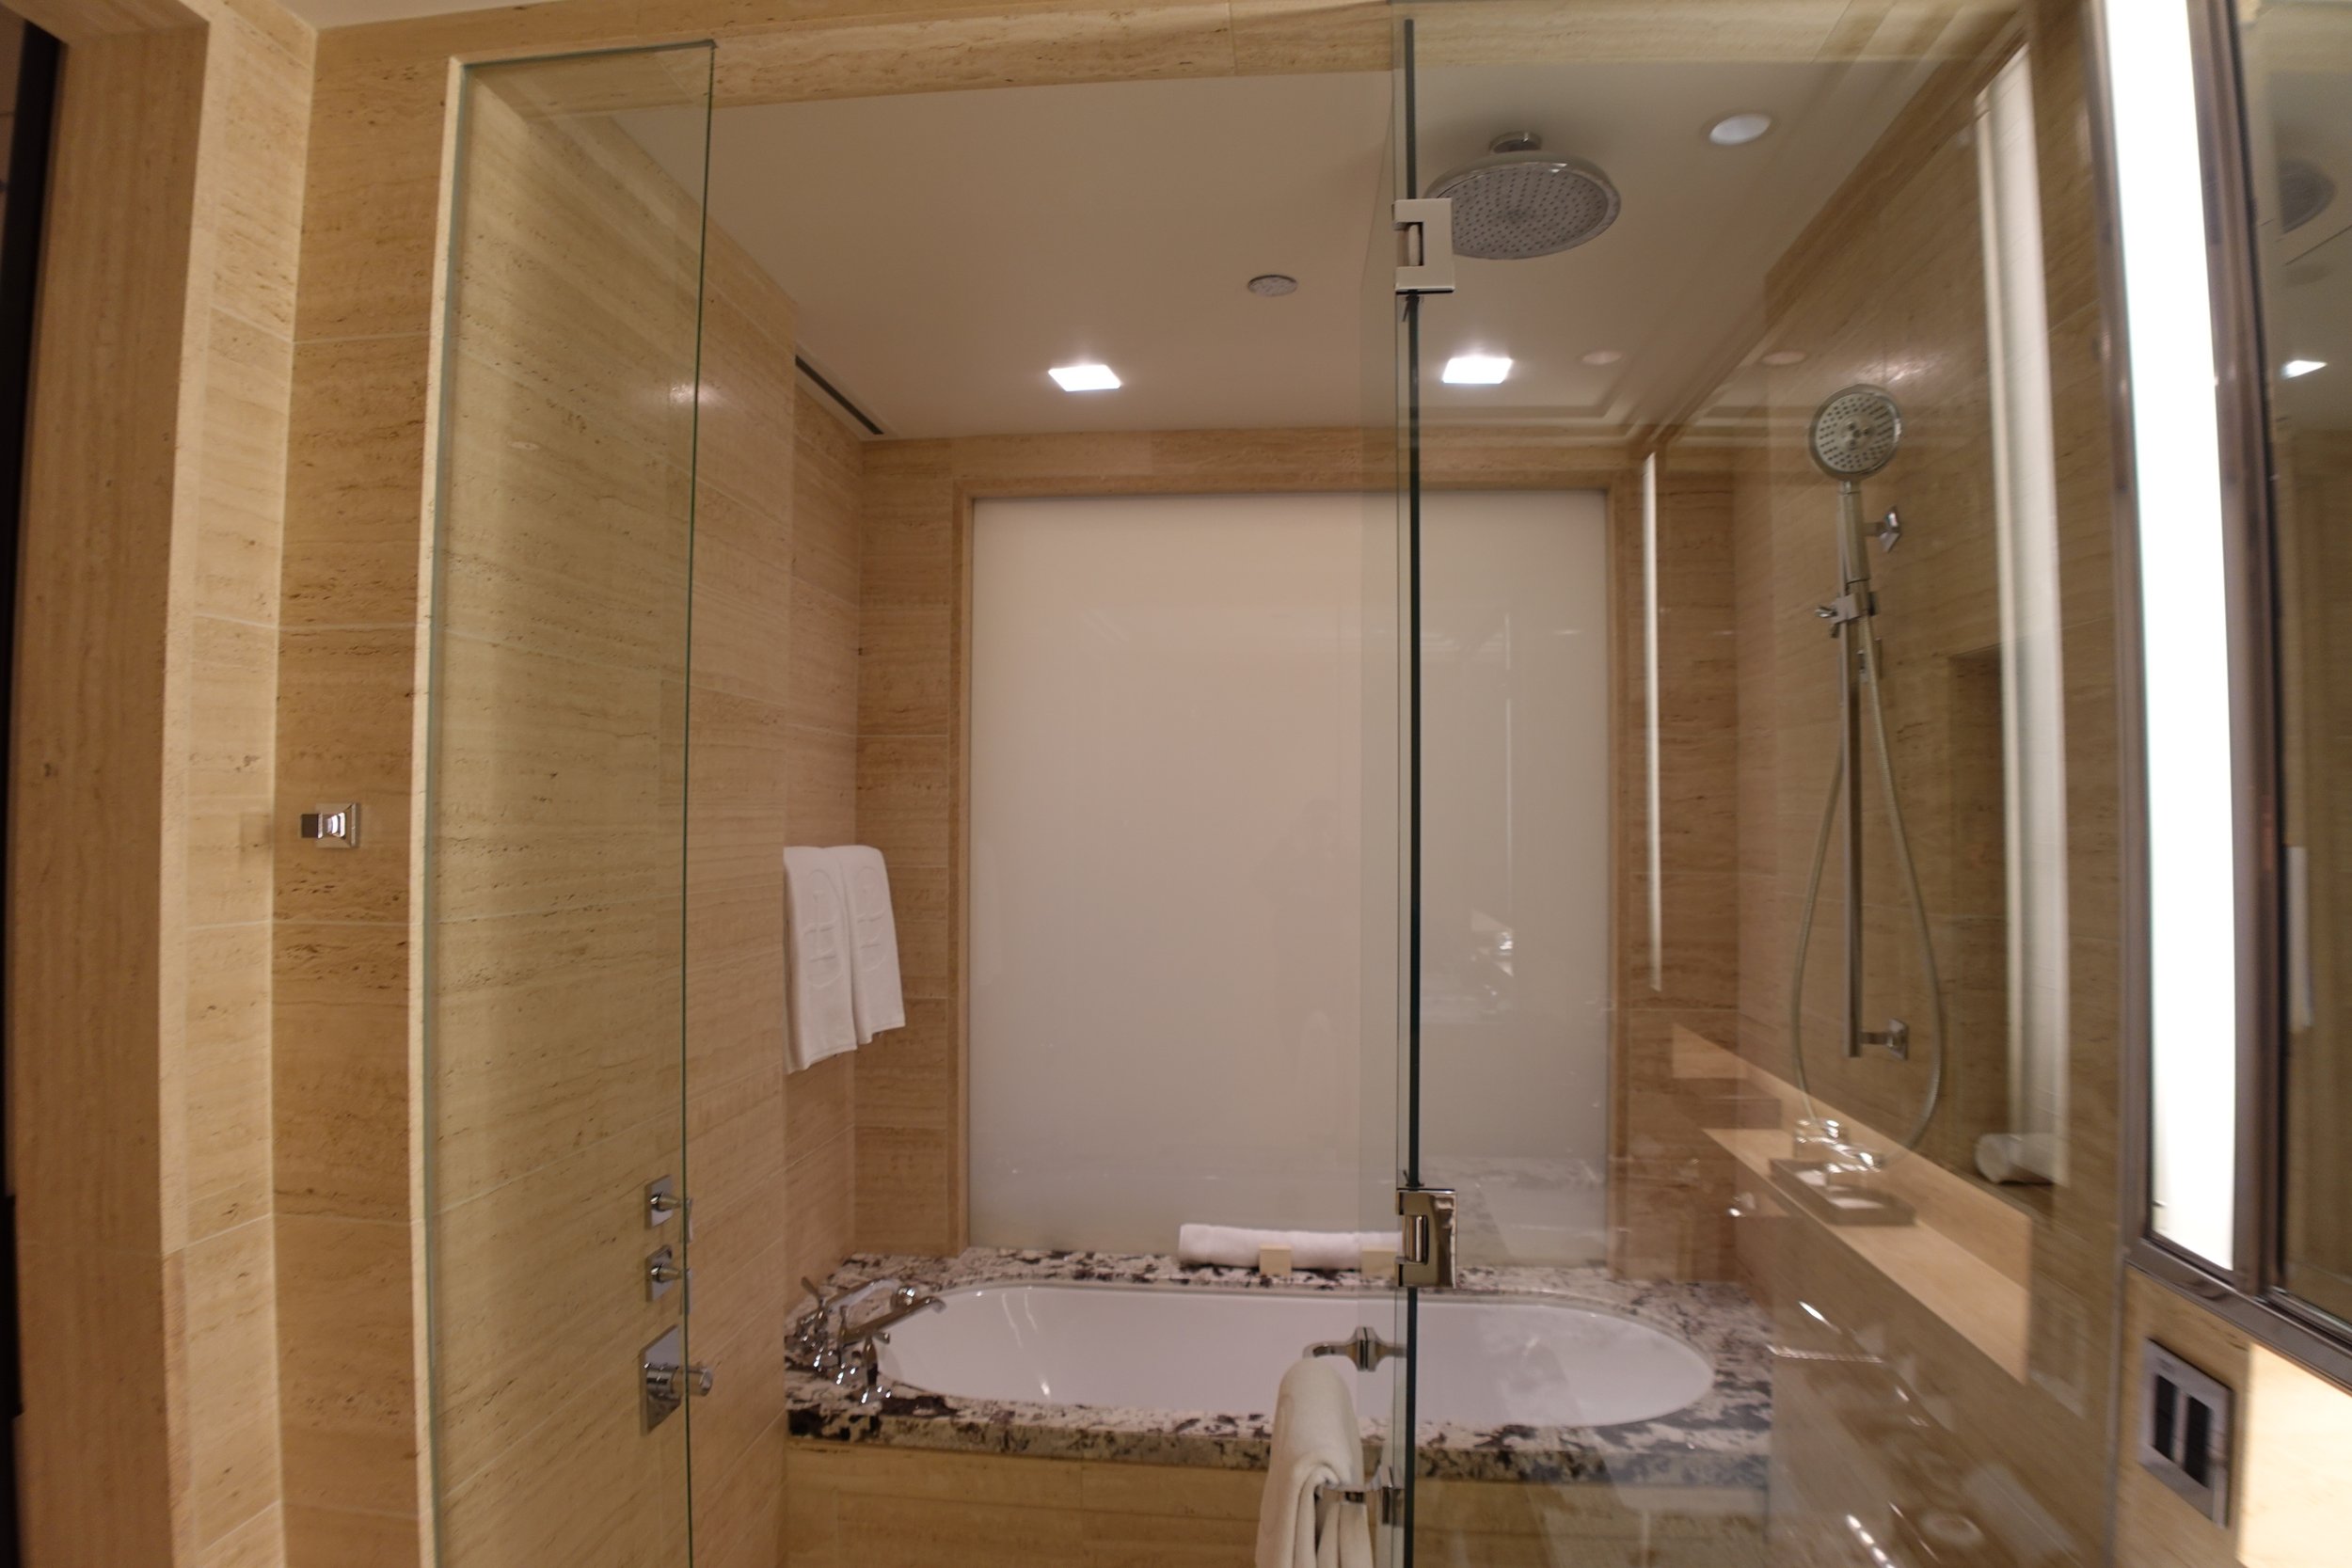  The shower “room” included the shower and the bathtub. I’ve got to say, the shower was divine with fantastic water pressure and the ability to activate both handheld and rainfall at the same time. The bathtub was enormous as well. The window which e